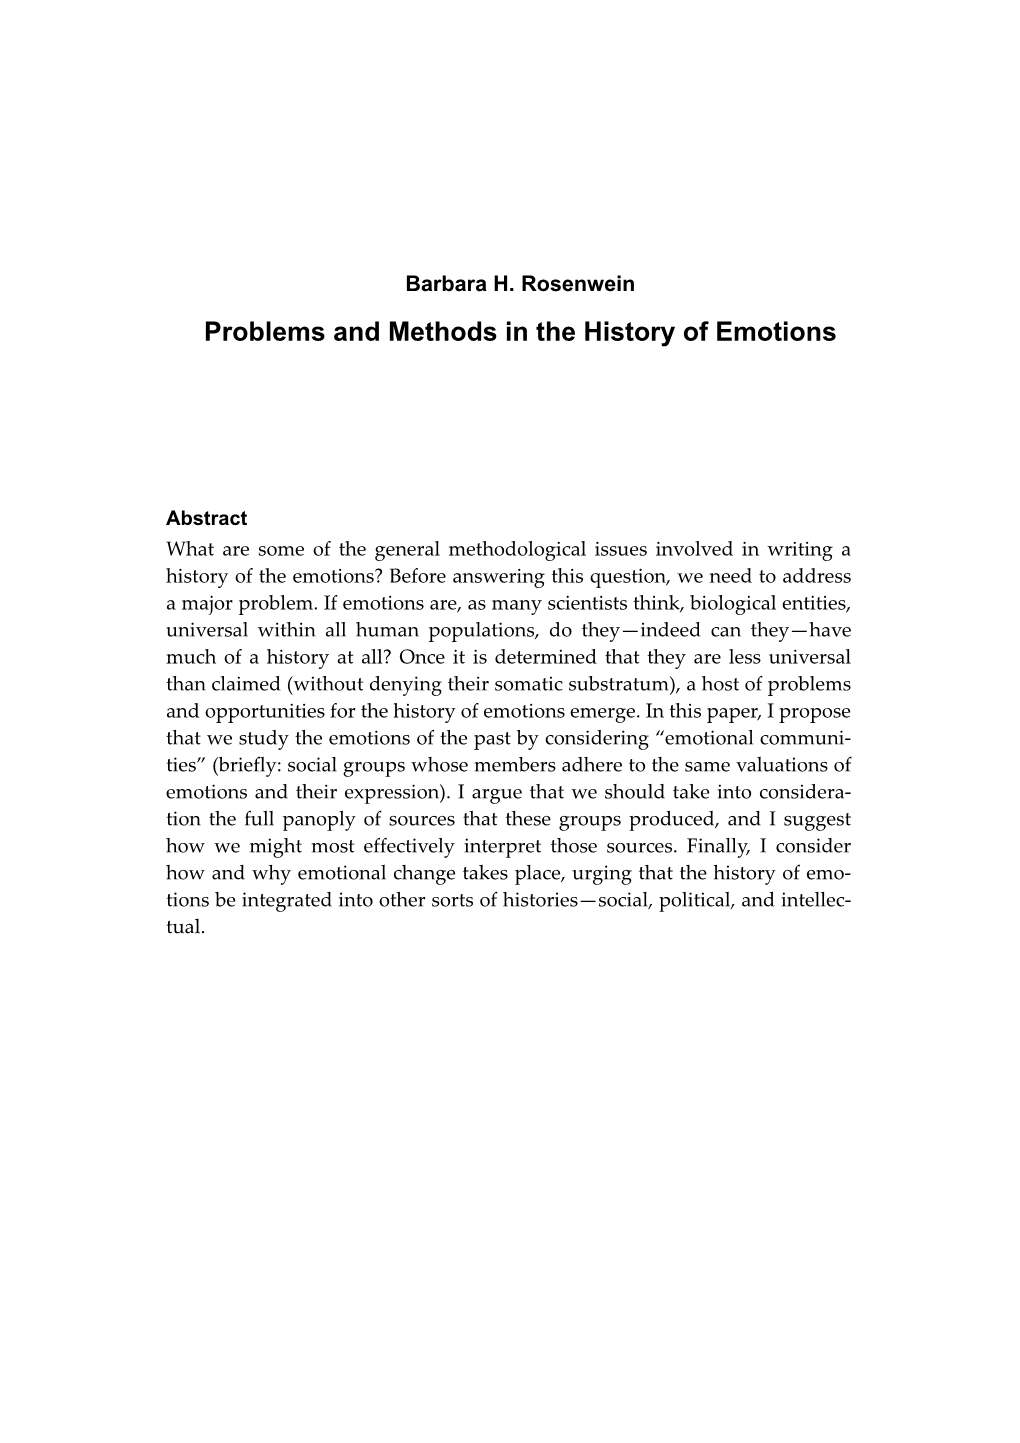 Barbara H. Rosenwein, “Problems and Methods in the History of Emotions,”